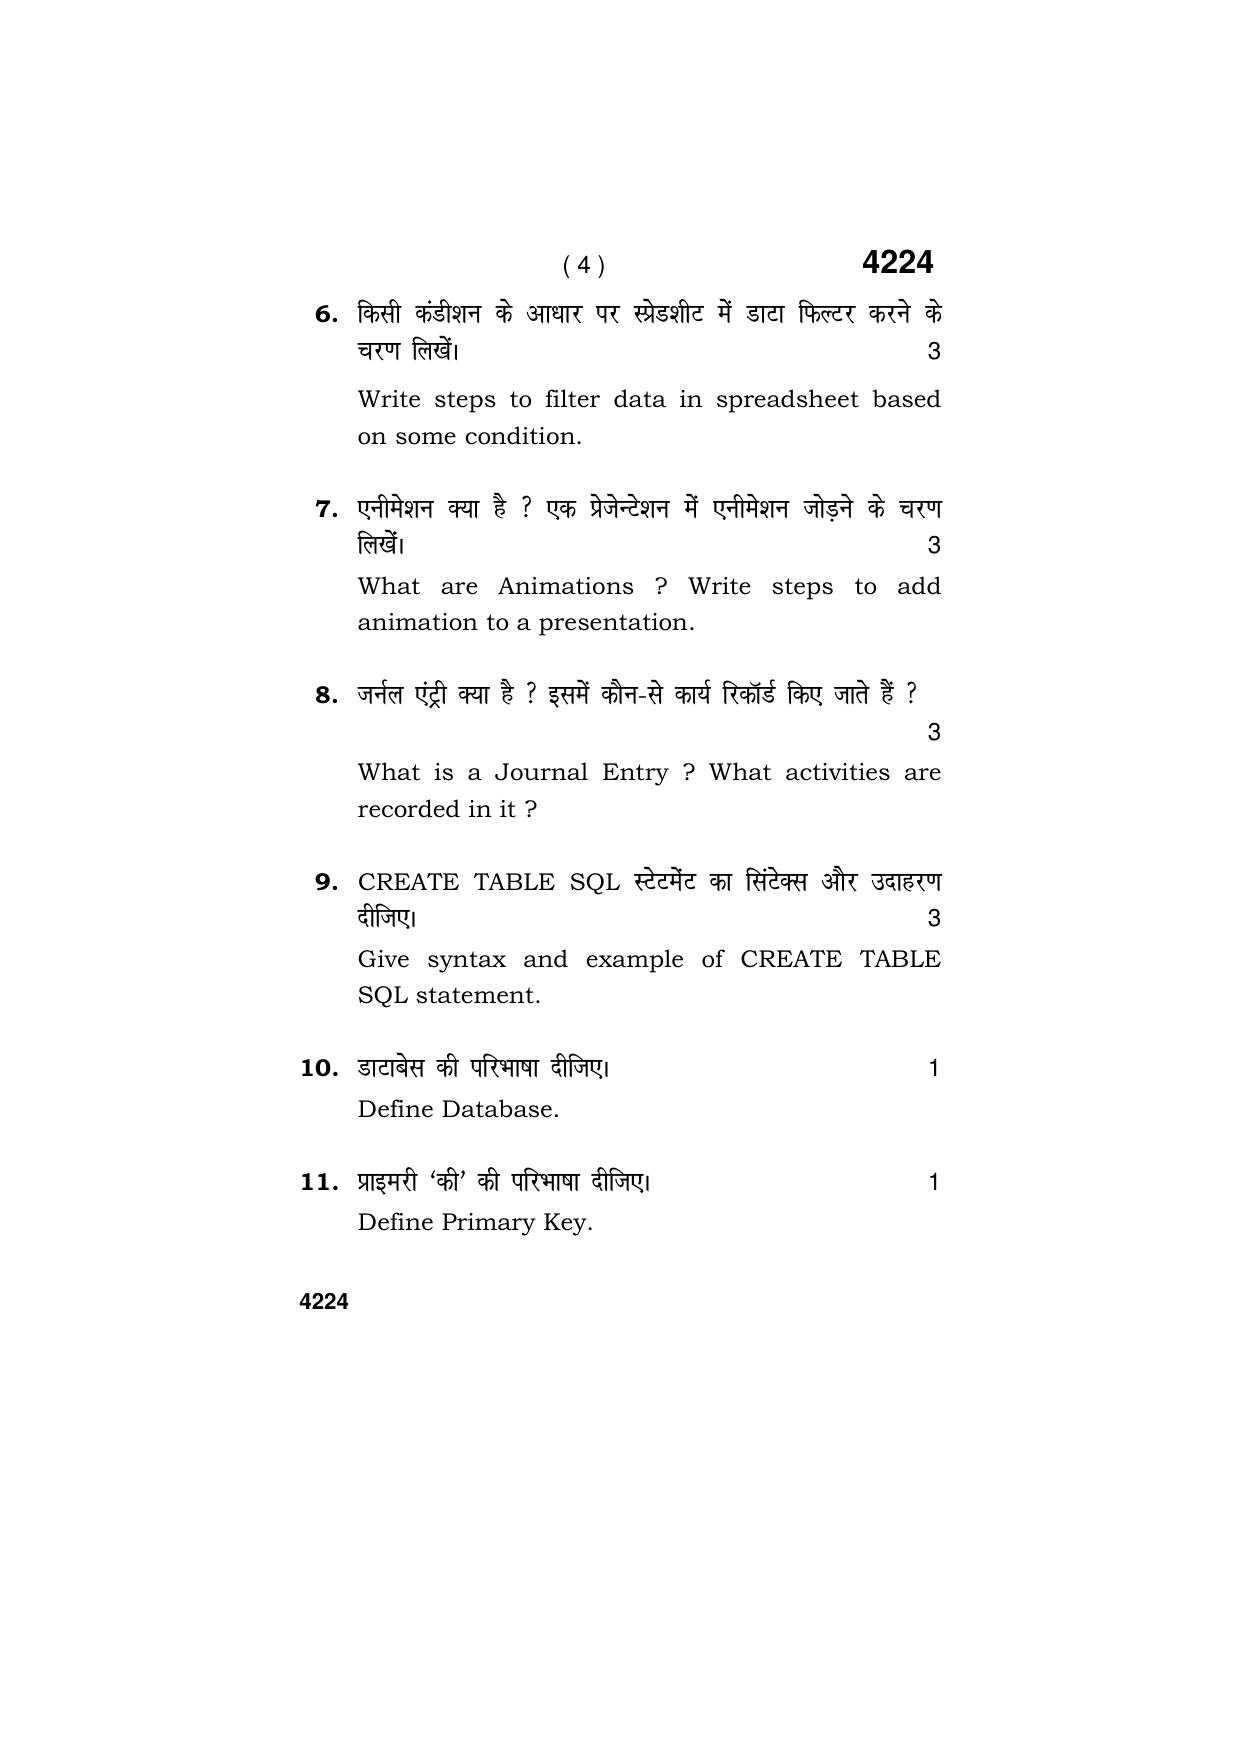 Haryana Board HBSE Class 10 IT & ITES 2019 Question Paper - Page 4